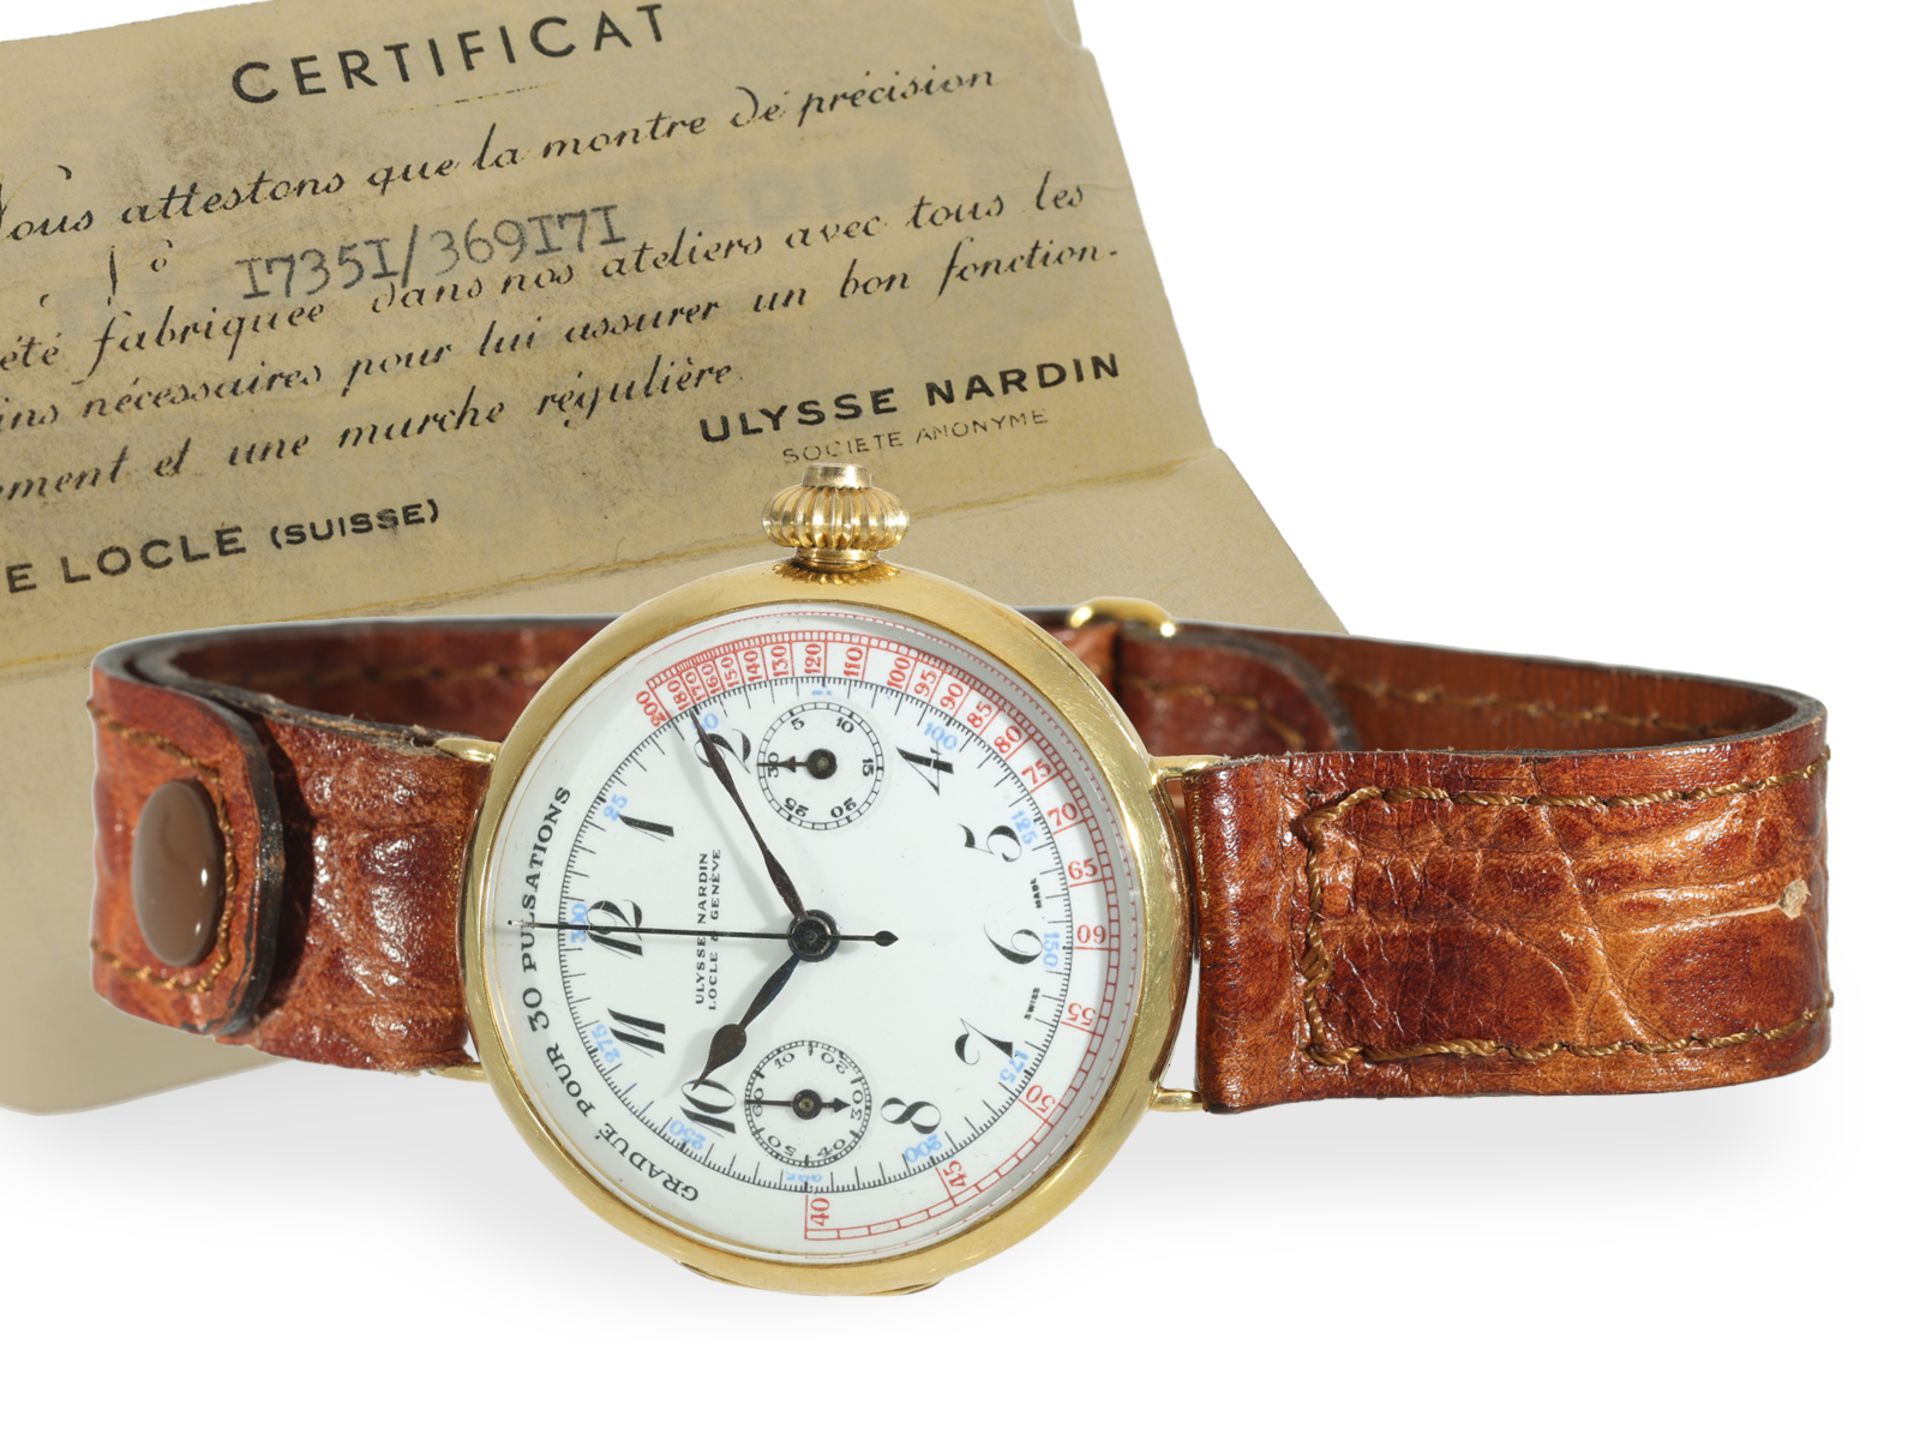 Wristwatch: rarity, one of the first Ulysse Nardin chronographs from around 1920, with original box 